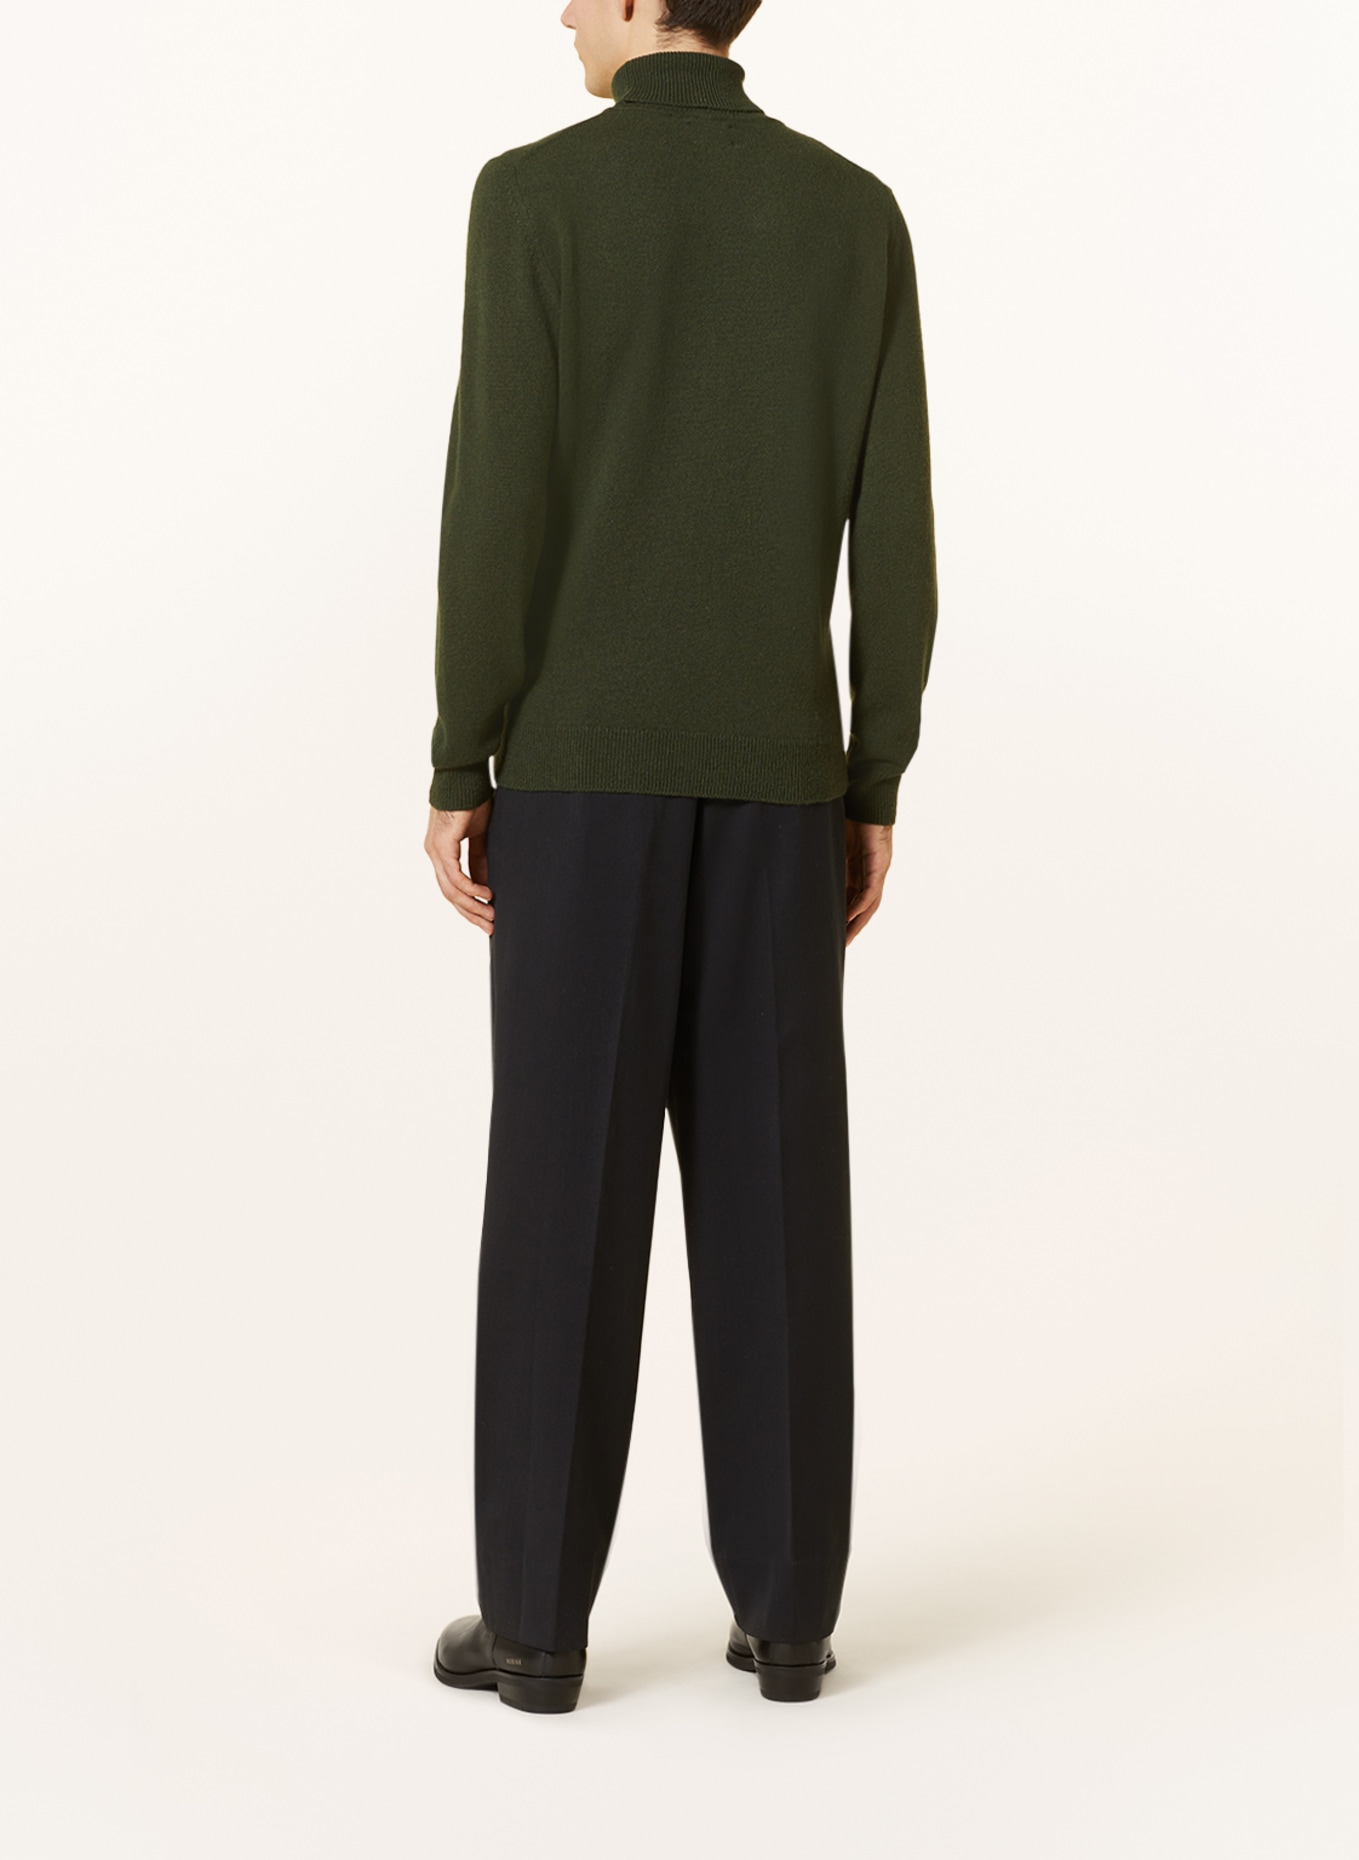 NORSE PROJECTS Turtleneck sweater KIRK made of merino wool, Color: GREEN (Image 3)